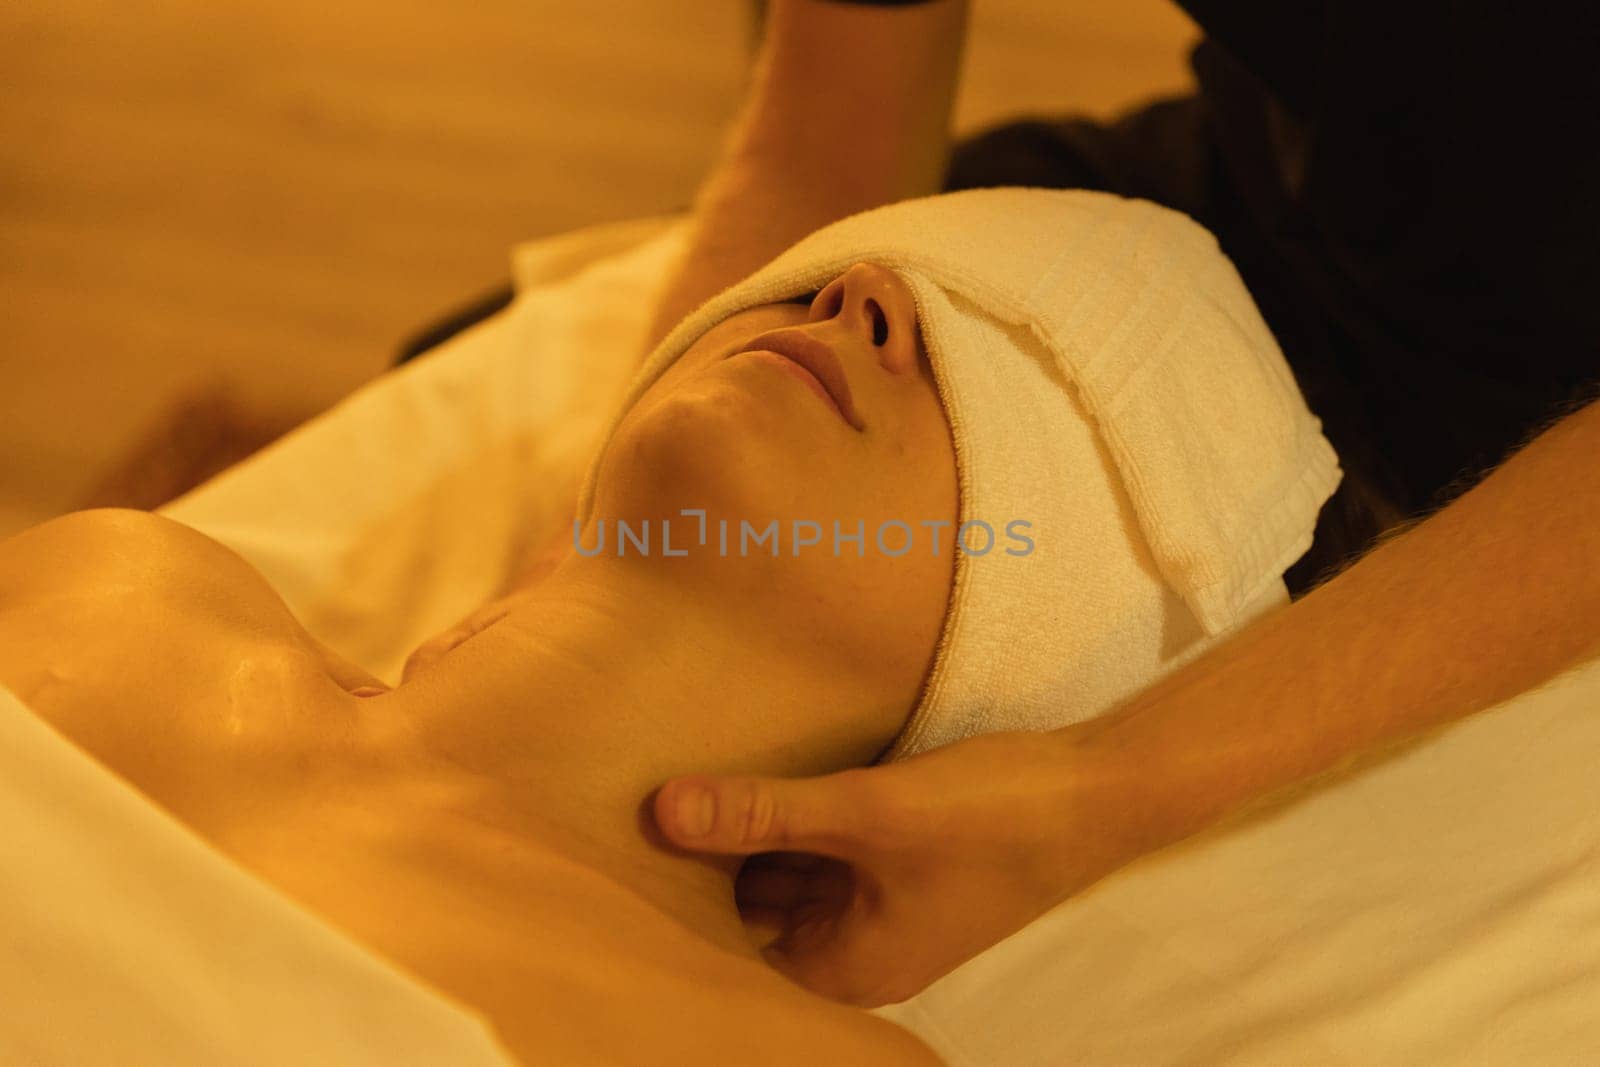 Massage procedure - woman client having a towel on her head while the therapist massaging her neck. Mid shot